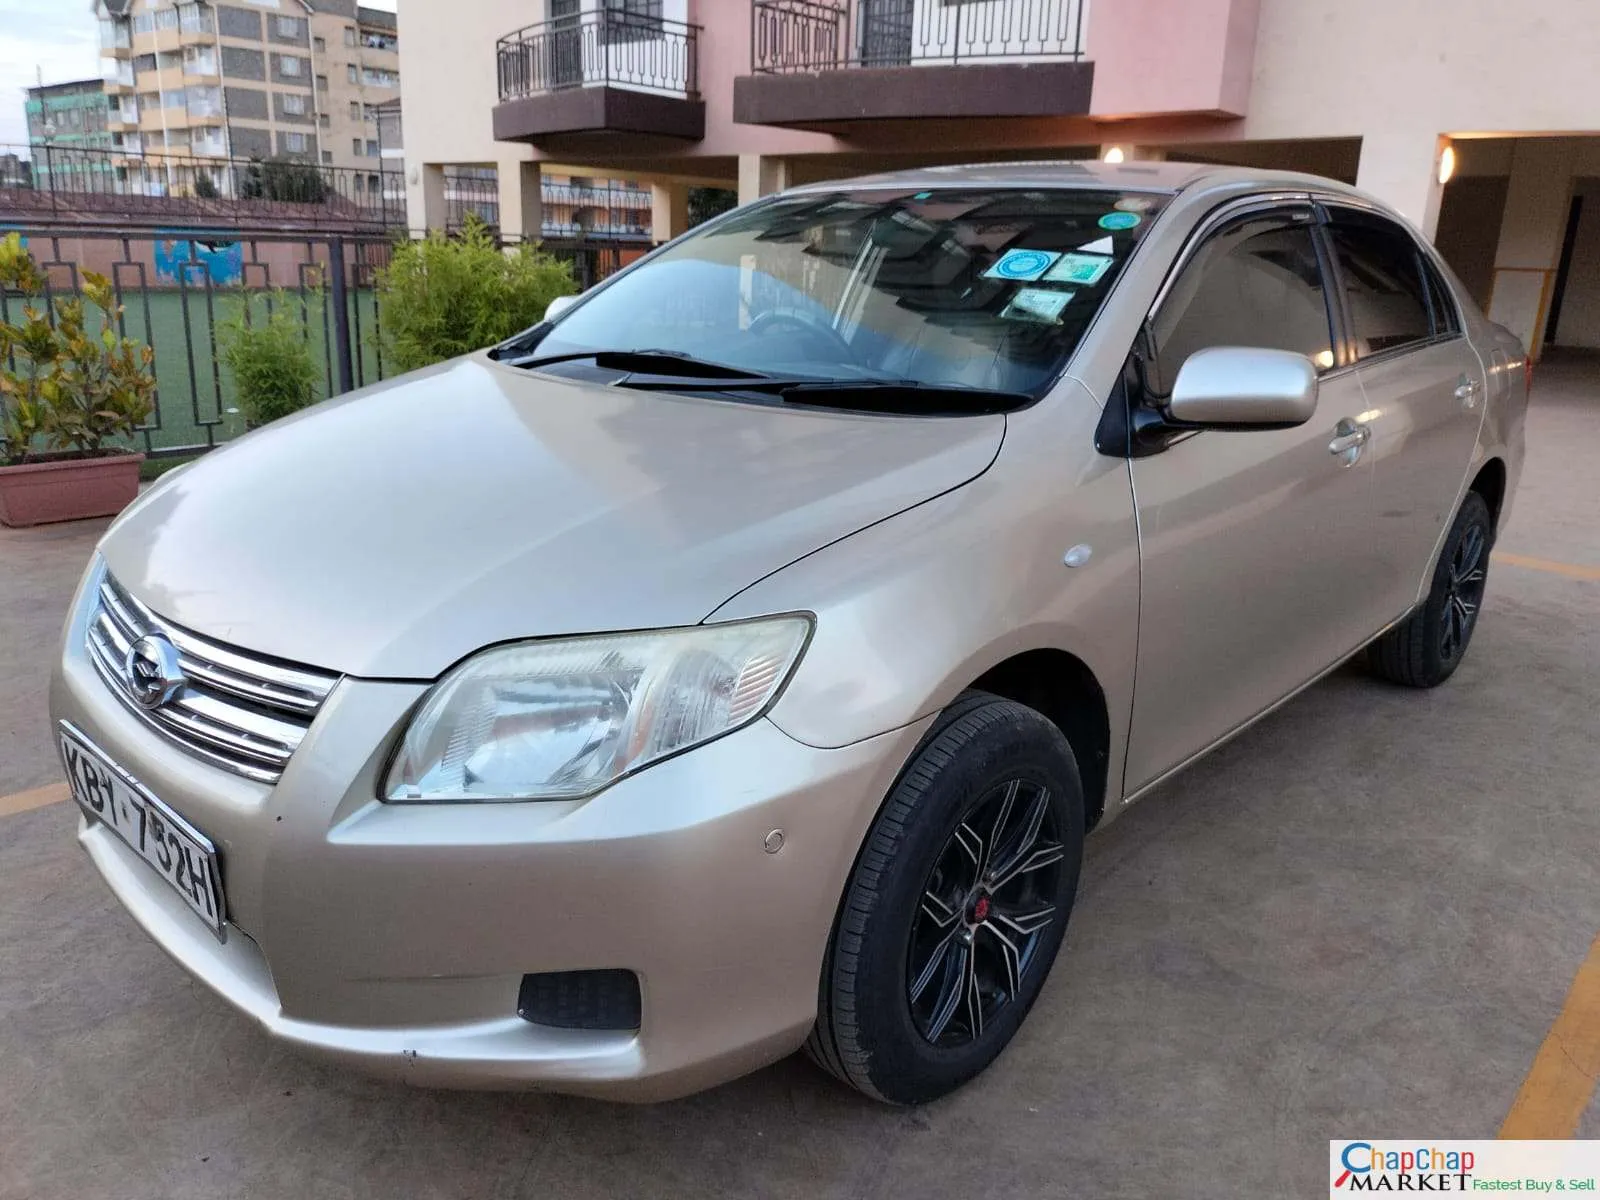 Cars Cars For Sale-Toyota AXIO Kenya CHEAPEST You pay 30% Deposit Trade in Ok Toyota Axio For Sale in Kenya hire purchase installment exclusive 9